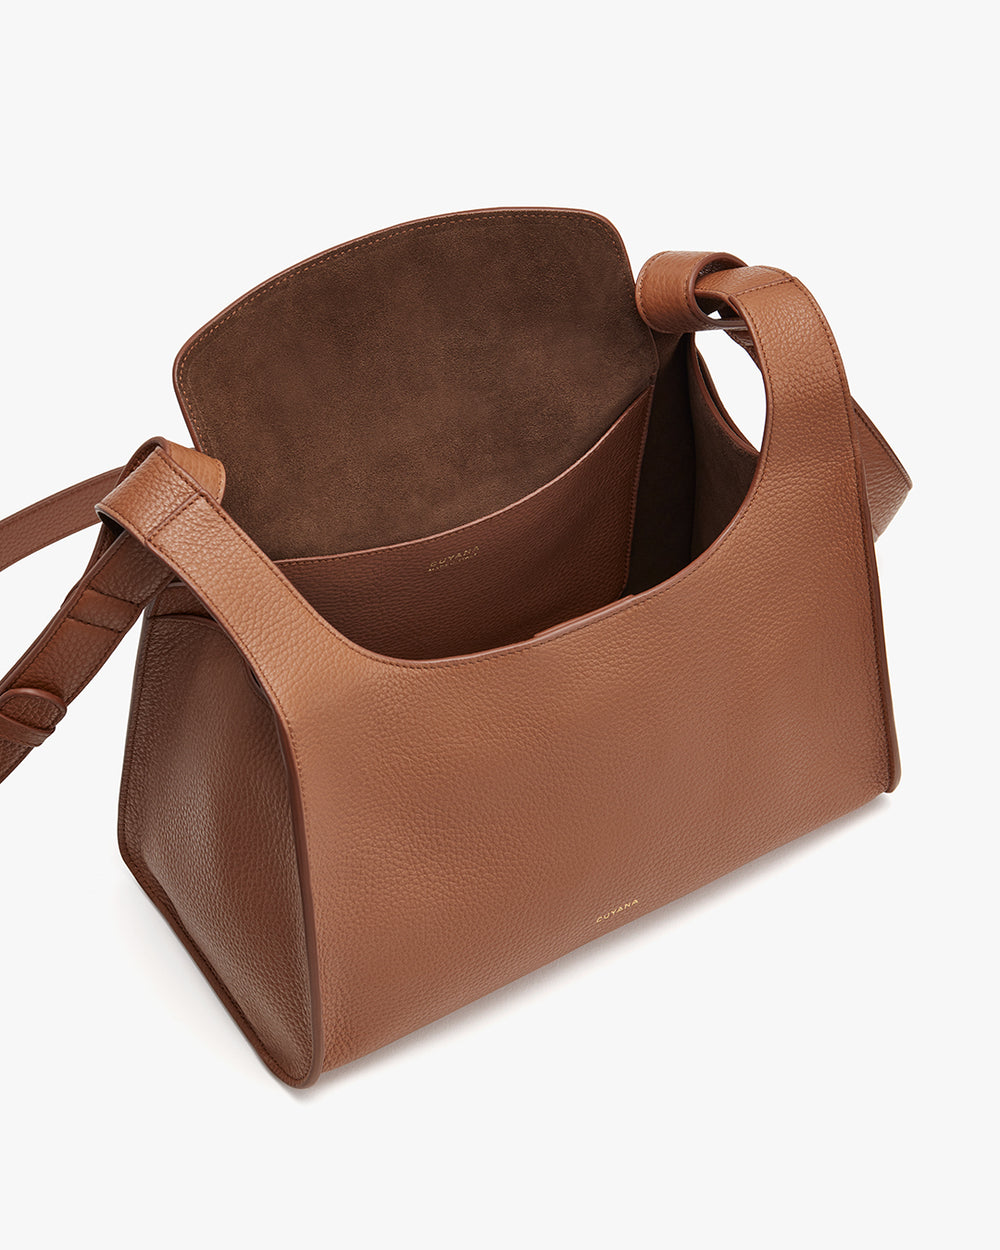 Open top handbag with an adjustable strap and interior view.